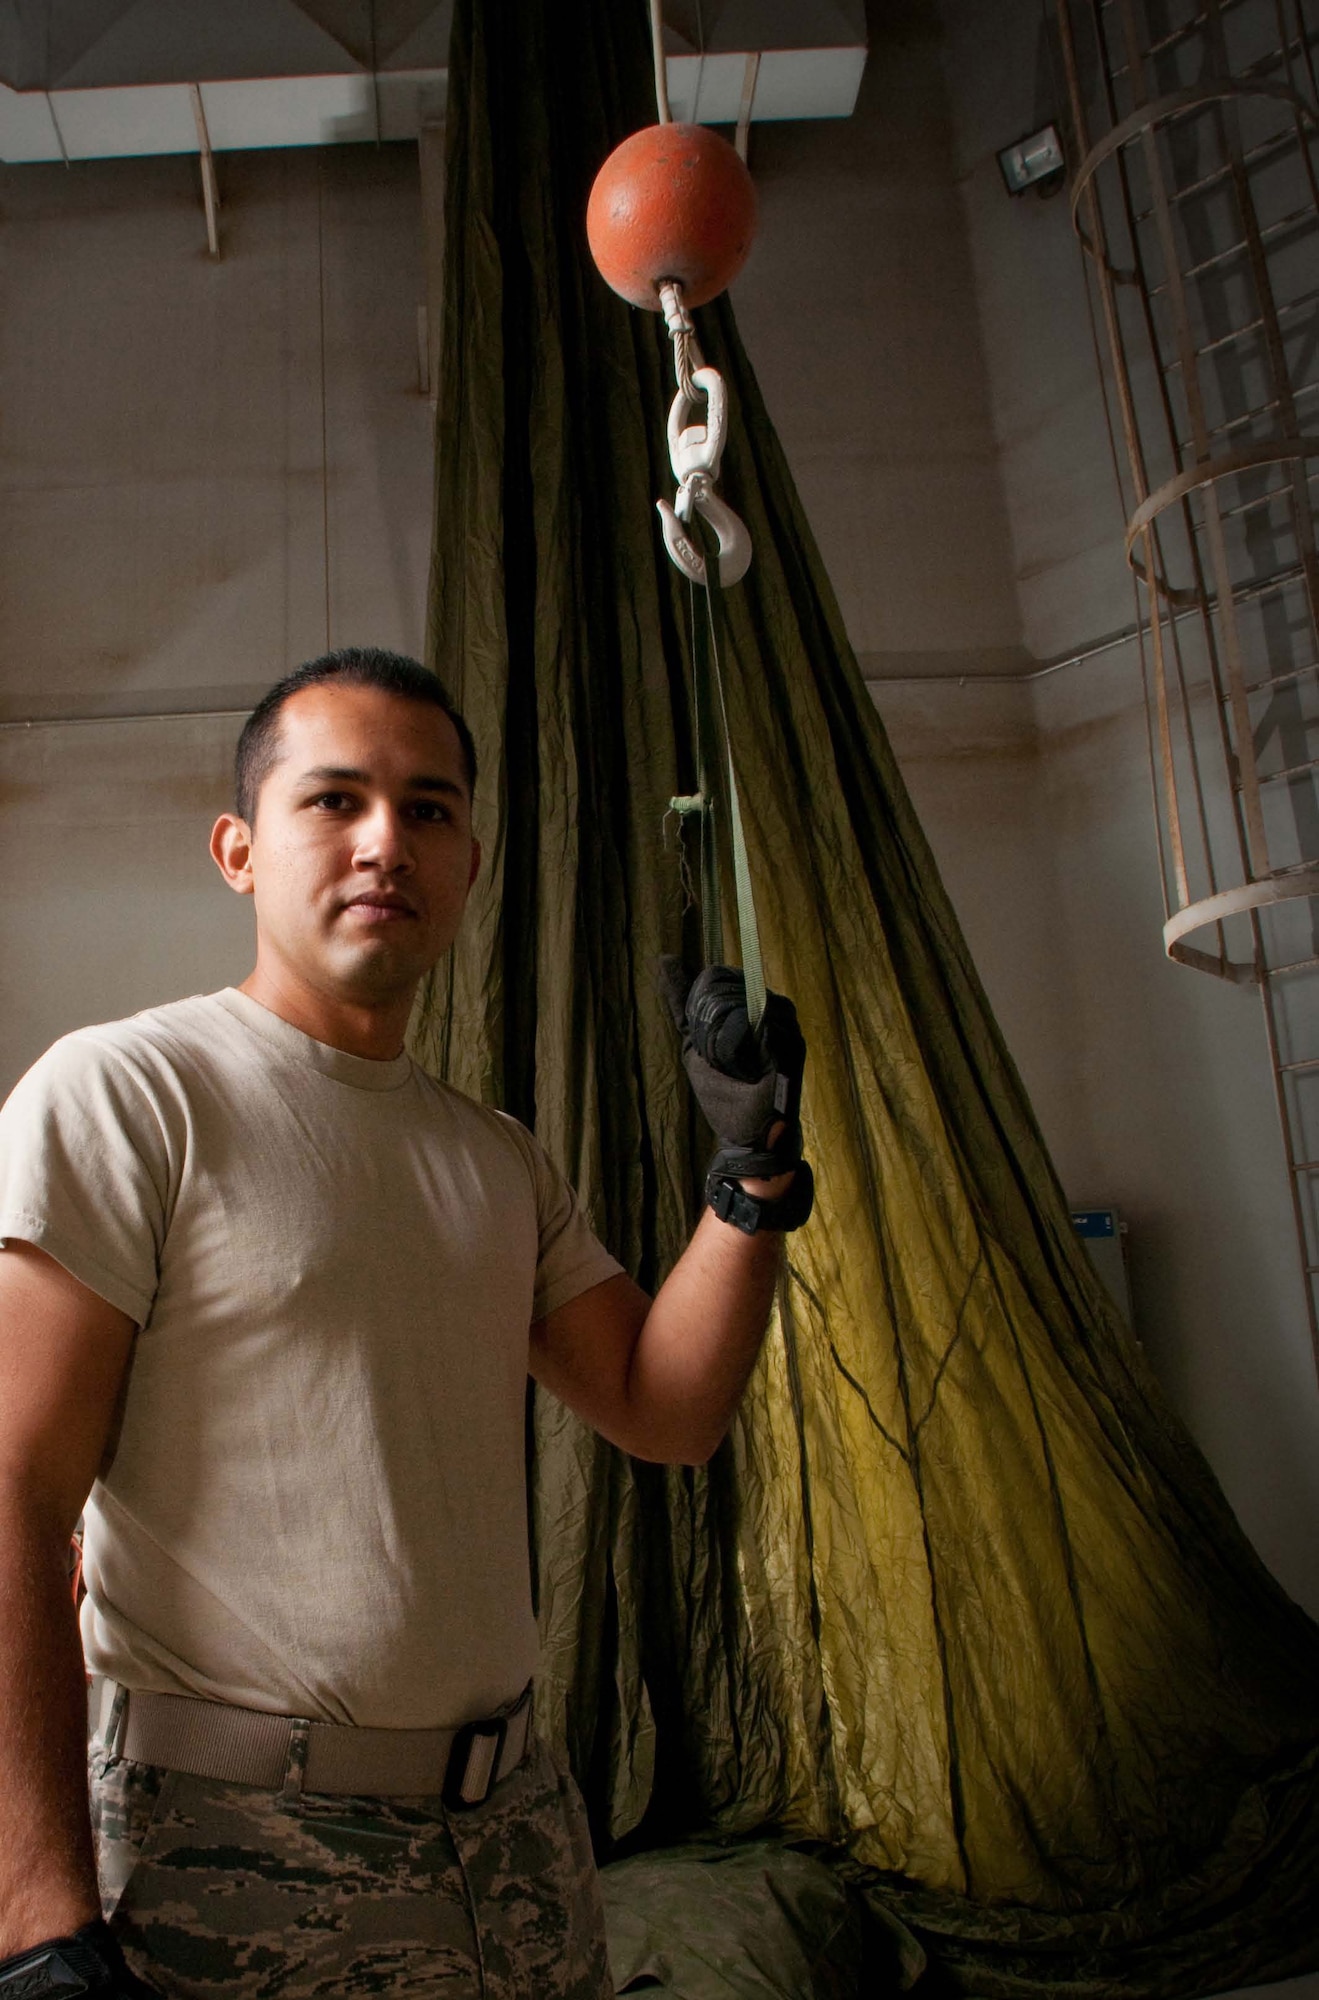 Staff Sgt. Carlos Puga from the 146th Airlift Wing's Air Terminal Operations is California’s 2013 Outstanding Airman of the Year. (U.S. Air Force photo by: Senior Airman Nicholas Carzis)